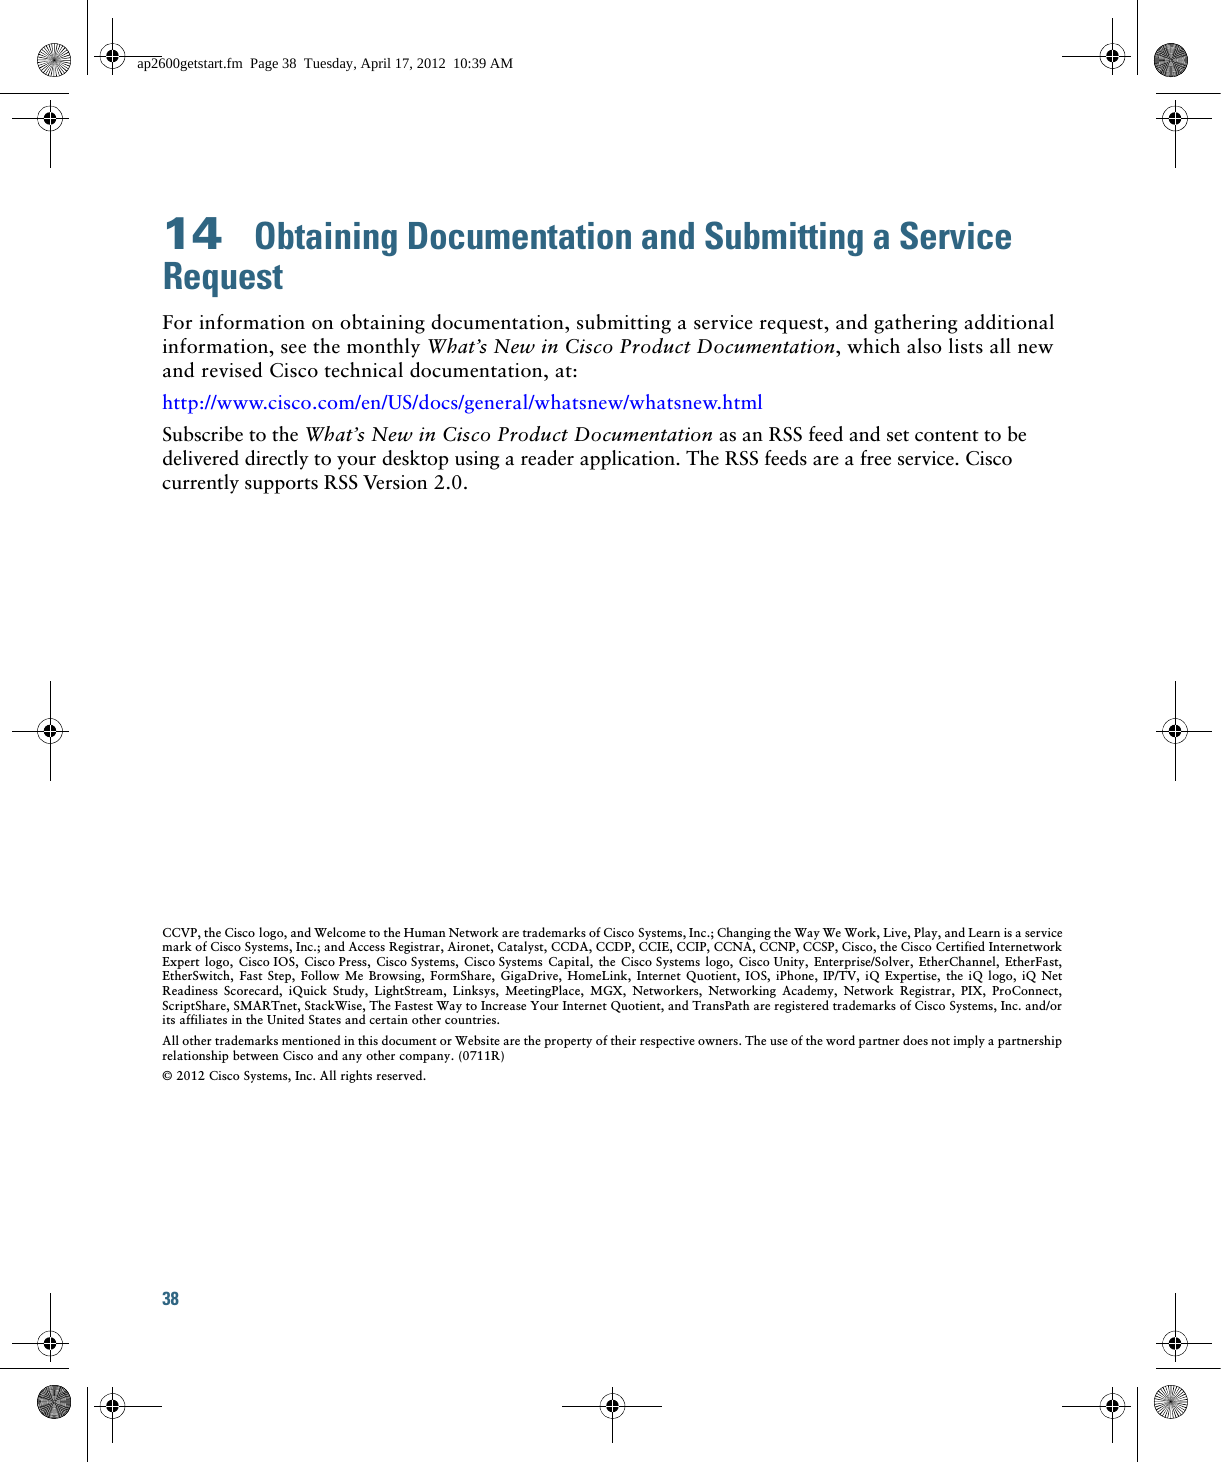 38 14  Obtaining Documentation and Submitting a Service RequestFor information on obtaining documentation, submitting a service request, and gathering additional information, see the monthly What’s New in Cisco Product Documentation, which also lists all new and revised Cisco technical documentation, at:http://www.cisco.com/en/US/docs/general/whatsnew/whatsnew.htmlSubscribe to the What’s New in Cisco Product Documentation as an RSS feed and set content to be delivered directly to your desktop using a reader application. The RSS feeds are a free service. Cisco currently supports RSS Version 2.0.CCVP, the Cisco logo, and Welcome to the Human Network are trademarks of Cisco Systems, Inc.; Changing the Way We Work, Live, Play, and Learn is a service mark of Cisco Systems, Inc.; and Access Registrar, Aironet, Catalyst, CCDA, CCDP, CCIE, CCIP, CCNA, CCNP, CCSP, Cisco, the Cisco Certified Internetwork Expert logo, Cisco IOS, Cisco Press, Cisco Systems, Cisco Systems Capital, the Cisco Systems logo, Cisco Unity, Enterprise/Solver, EtherChannel, EtherFast, EtherSwitch, Fast Step, Follow Me Browsing, FormShare, GigaDrive, HomeLink, Internet Quotient, IOS, iPhone, IP/TV, iQ Expertise, the iQ logo, iQ Net Readiness Scorecard, iQuick Study, LightStream, Linksys, MeetingPlace, MGX, Networkers, Networking Academy, Network Registrar, PIX, ProConnect, ScriptShare, SMARTnet, StackWise, The Fastest Way to Increase Your Internet Quotient, and TransPath are registered trademarks of Cisco Systems, Inc. and/or its affiliates in the United States and certain other countries. All other trademarks mentioned in this document or Website are the property of their respective owners. The use of the word partner does not imply a partnership relationship between Cisco and any other company. (0711R)© 2012 Cisco Systems, Inc. All rights reserved.ap2600getstart.fm  Page 38  Tuesday, April 17, 2012  10:39 AM